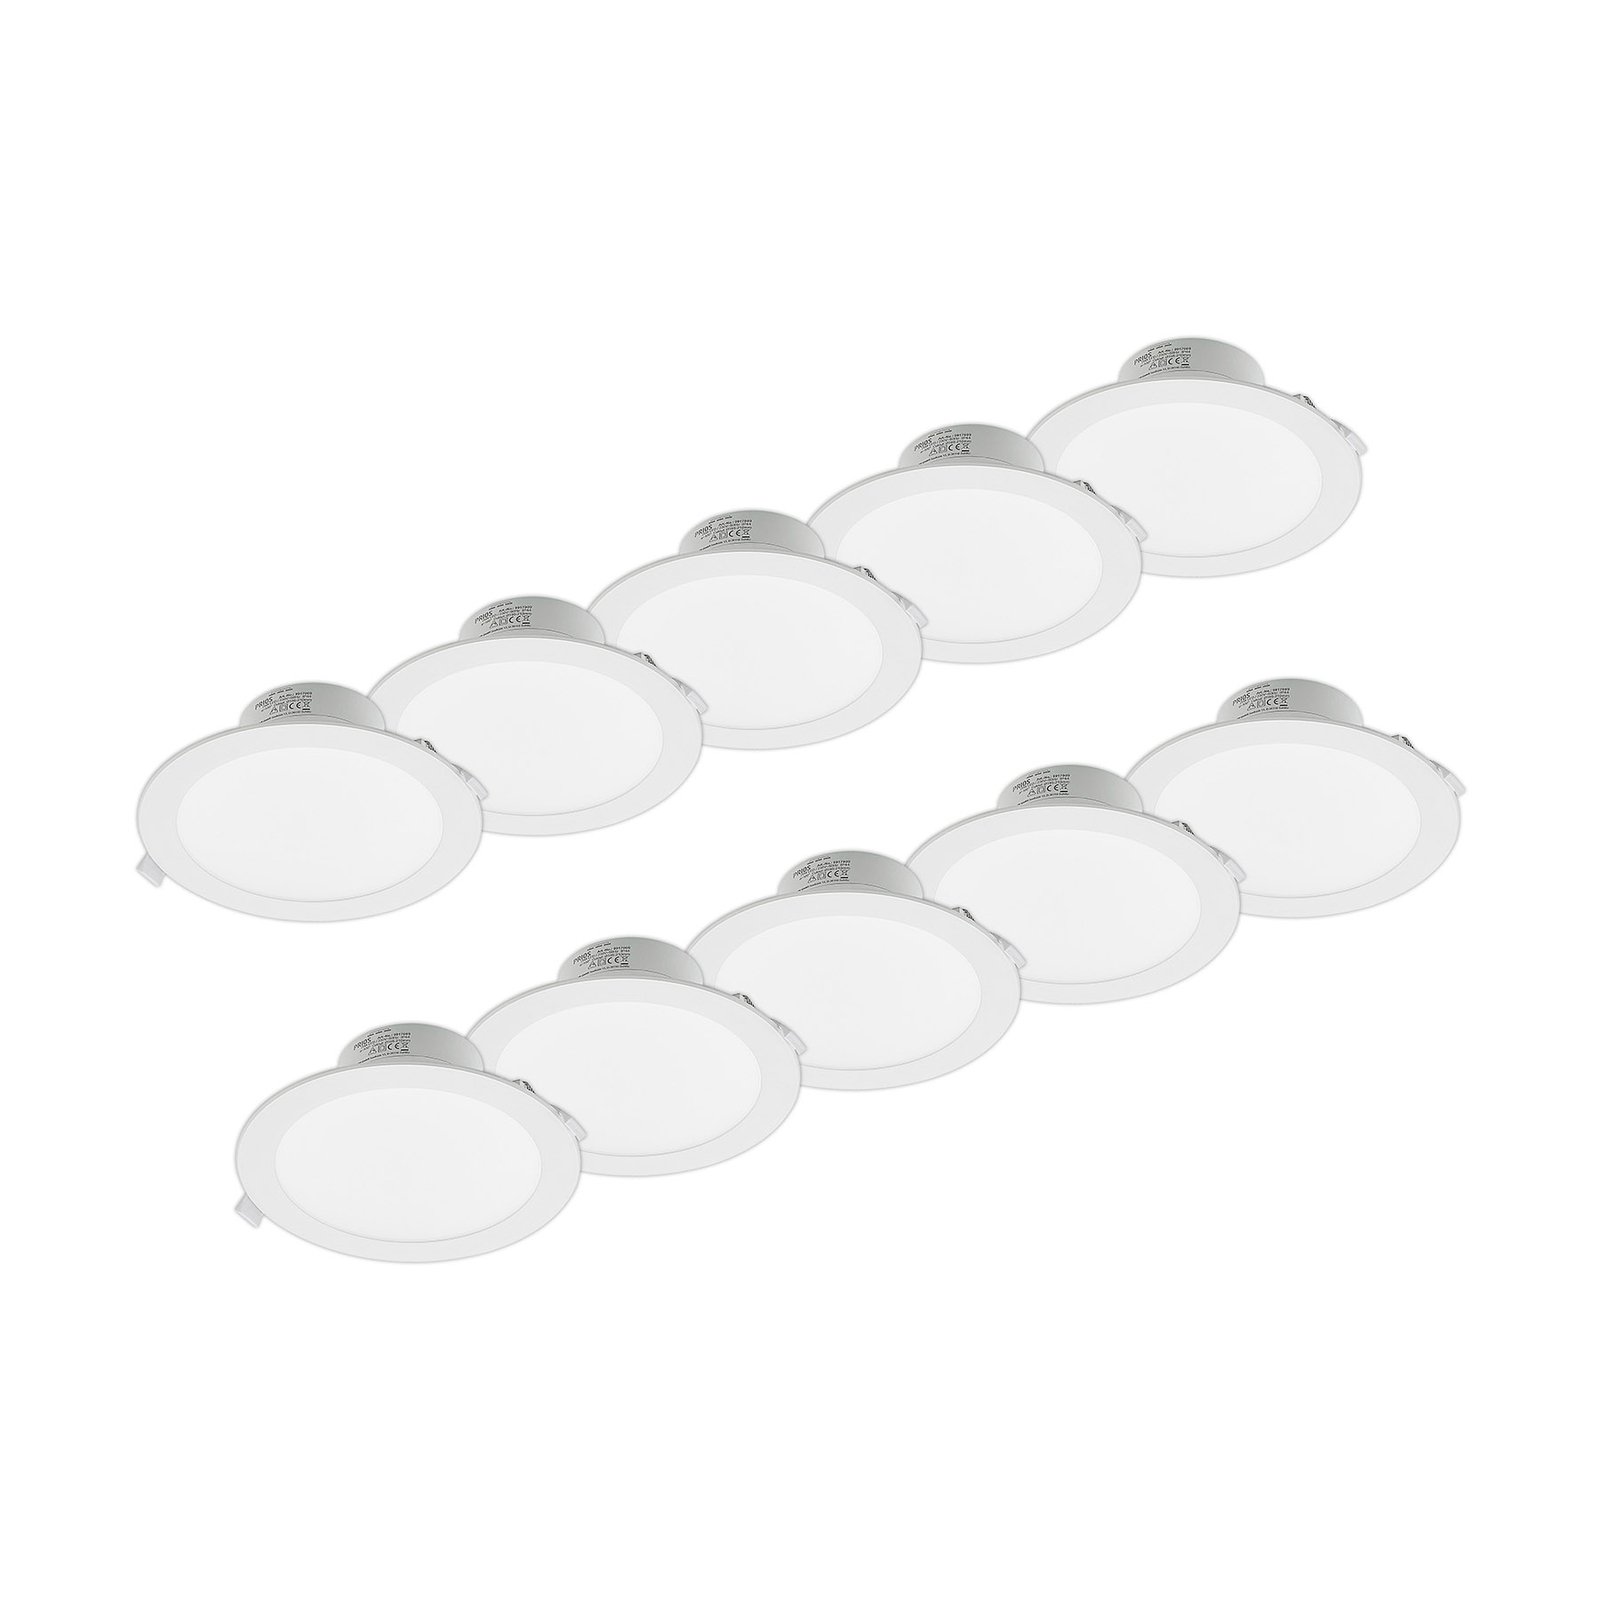 Prios LED recessed light Rida, 22.5cm, 25W, 10pcs, CCT, dimmable